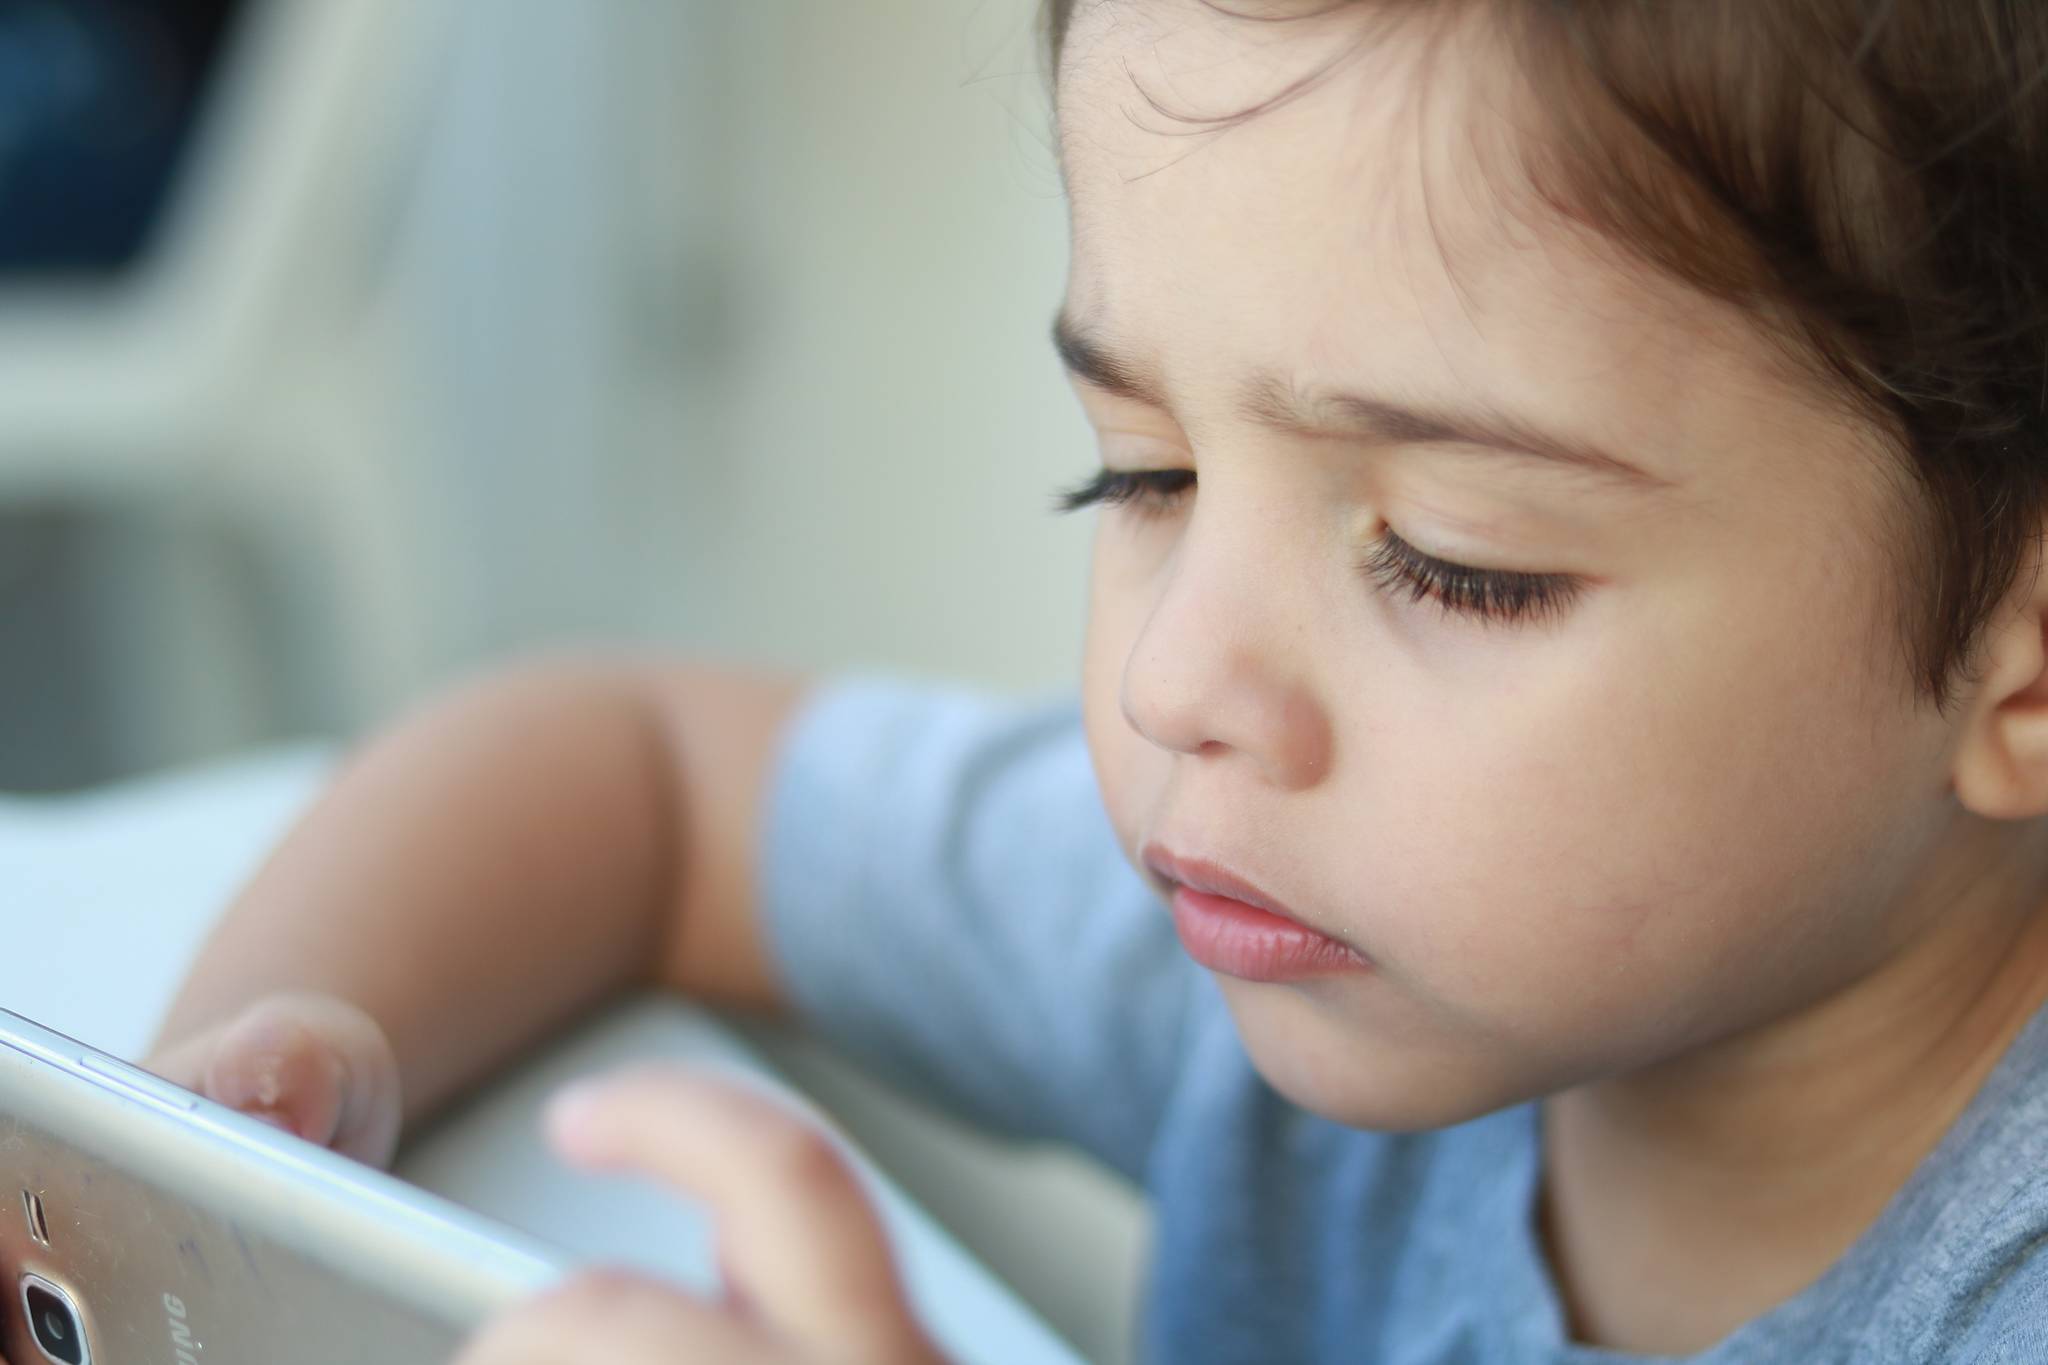 Young kids could be exposed to inappropriate in-app ads